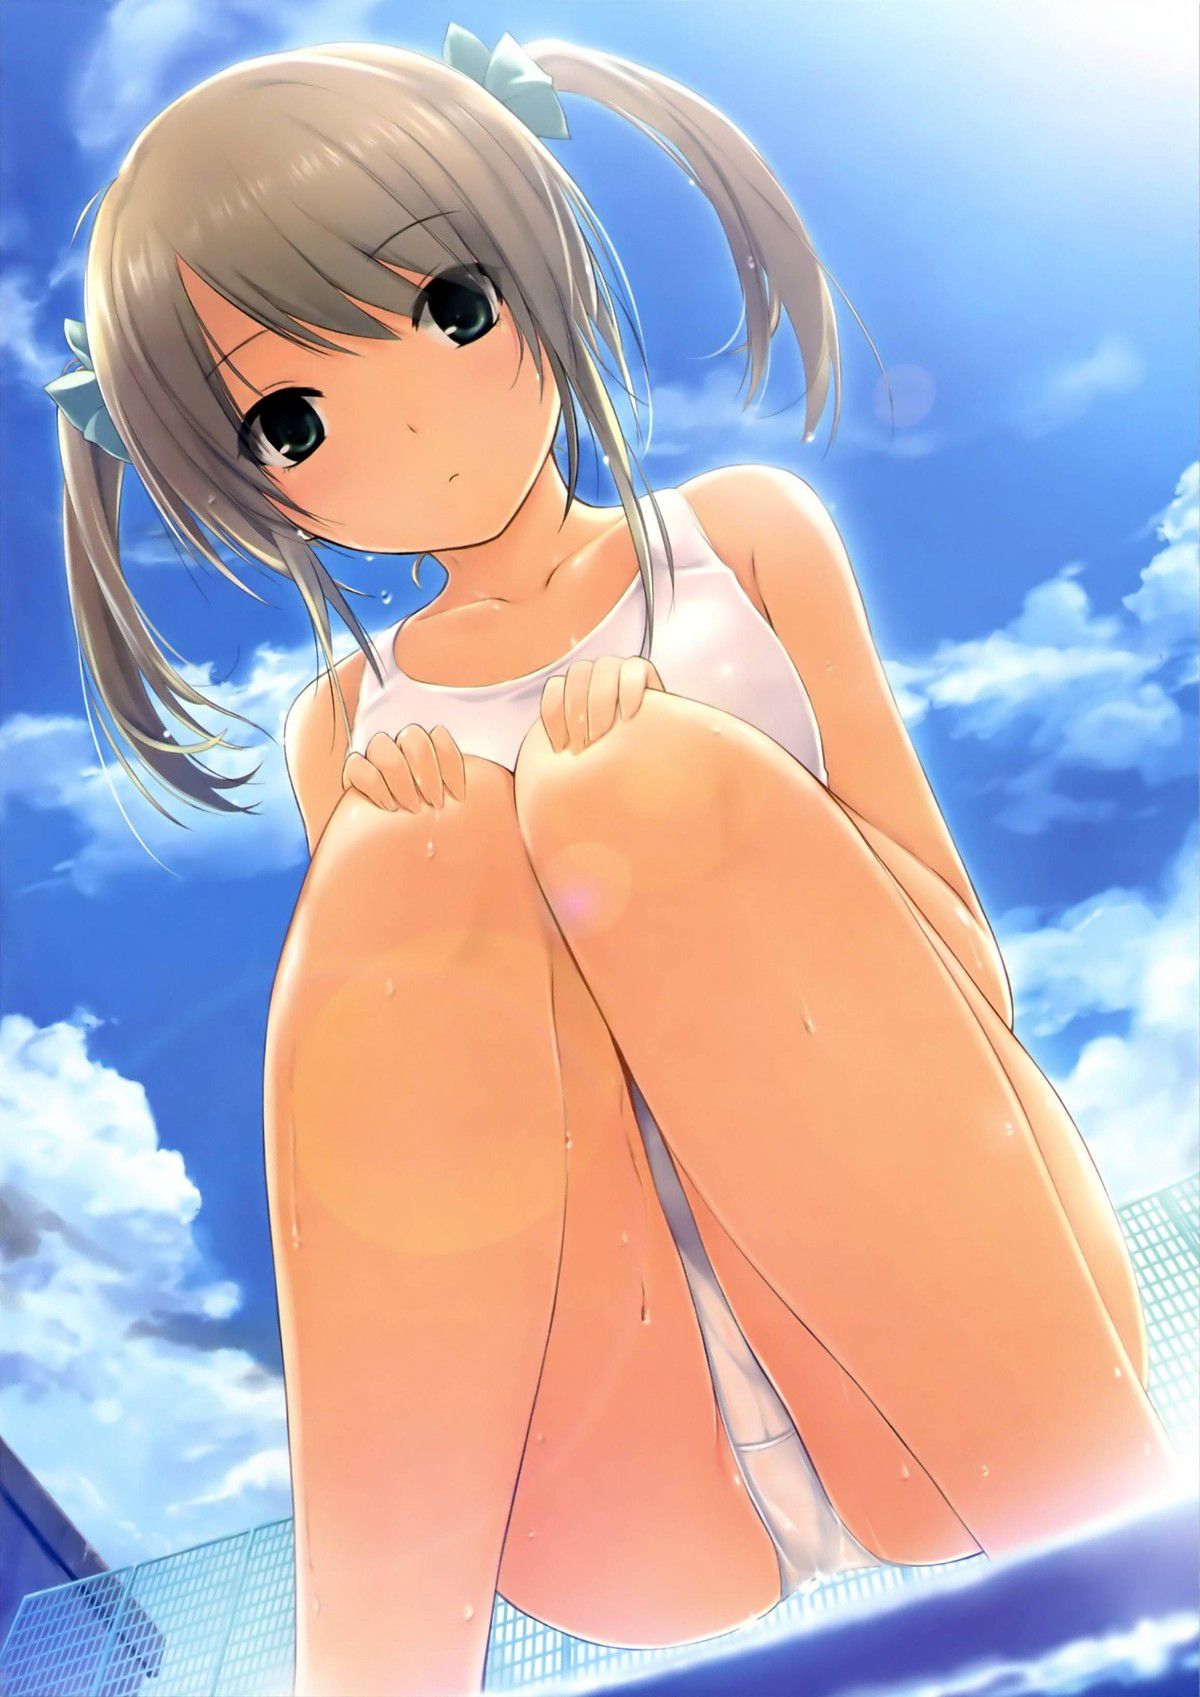 Refreshes the skin component for girl bikini pictures. Vol.10 29